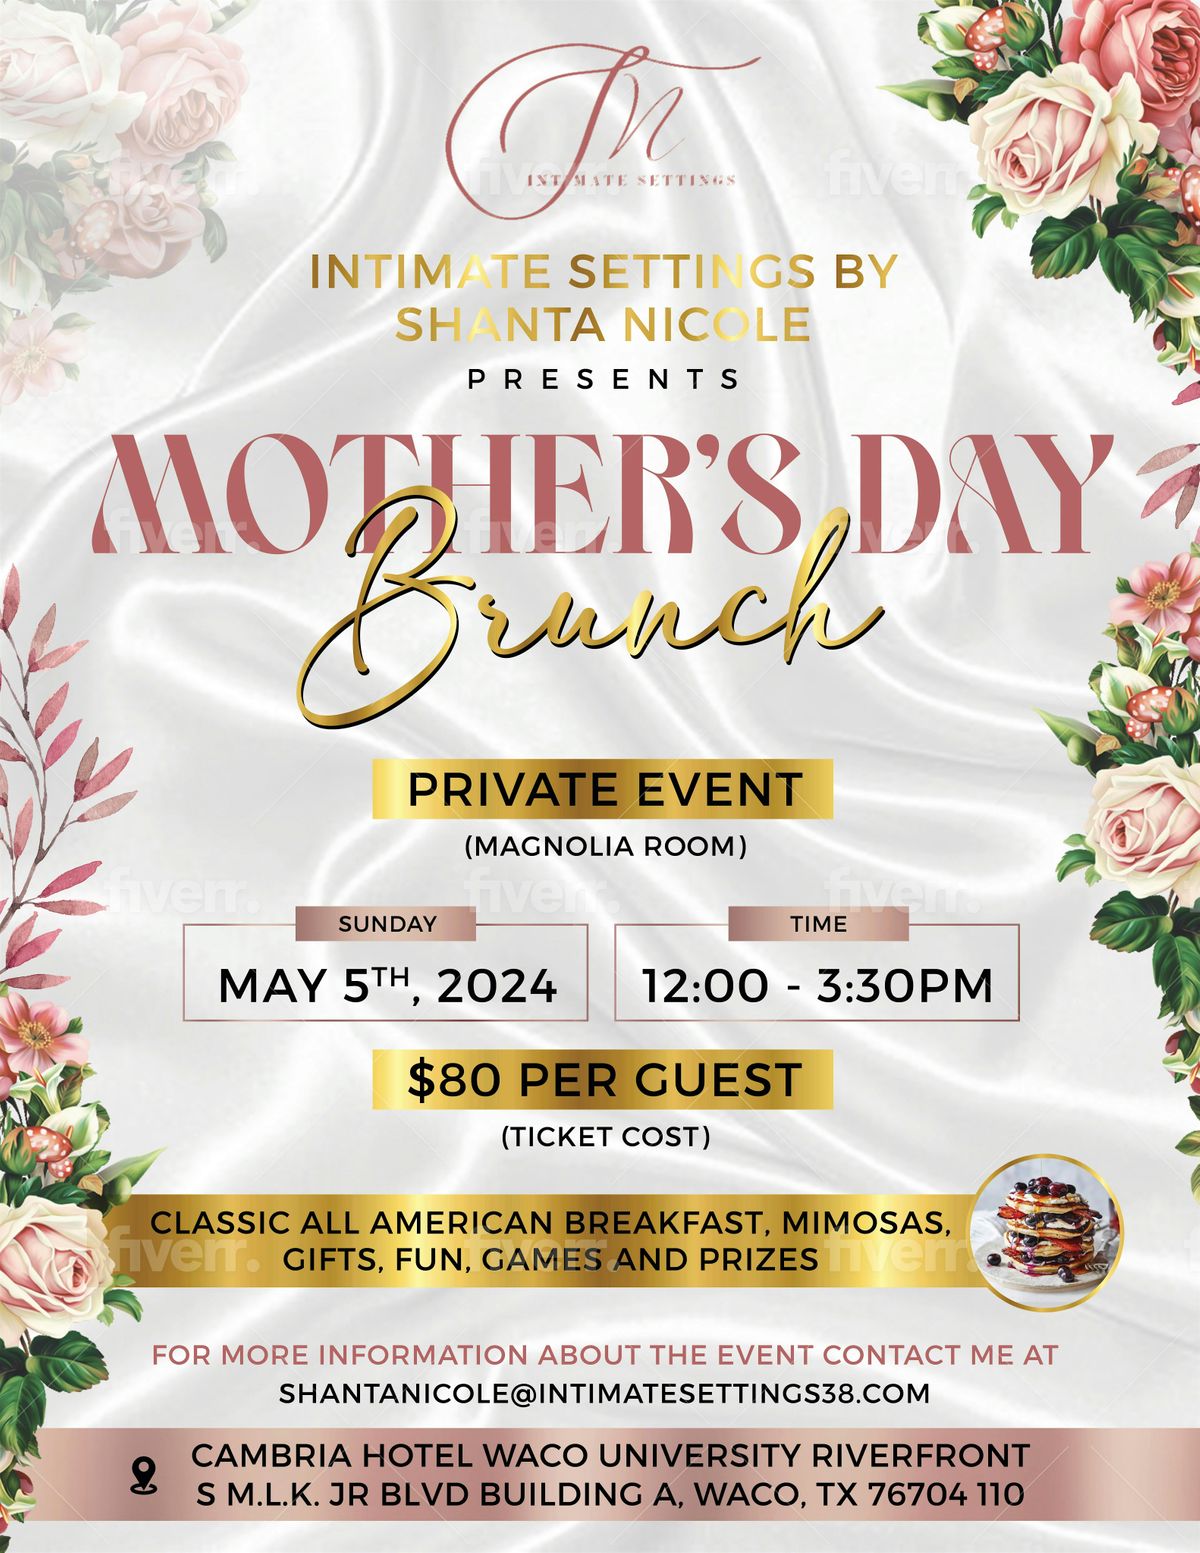 Intimate Settings by Shanta Nicole presents: Mother's Day Brunch